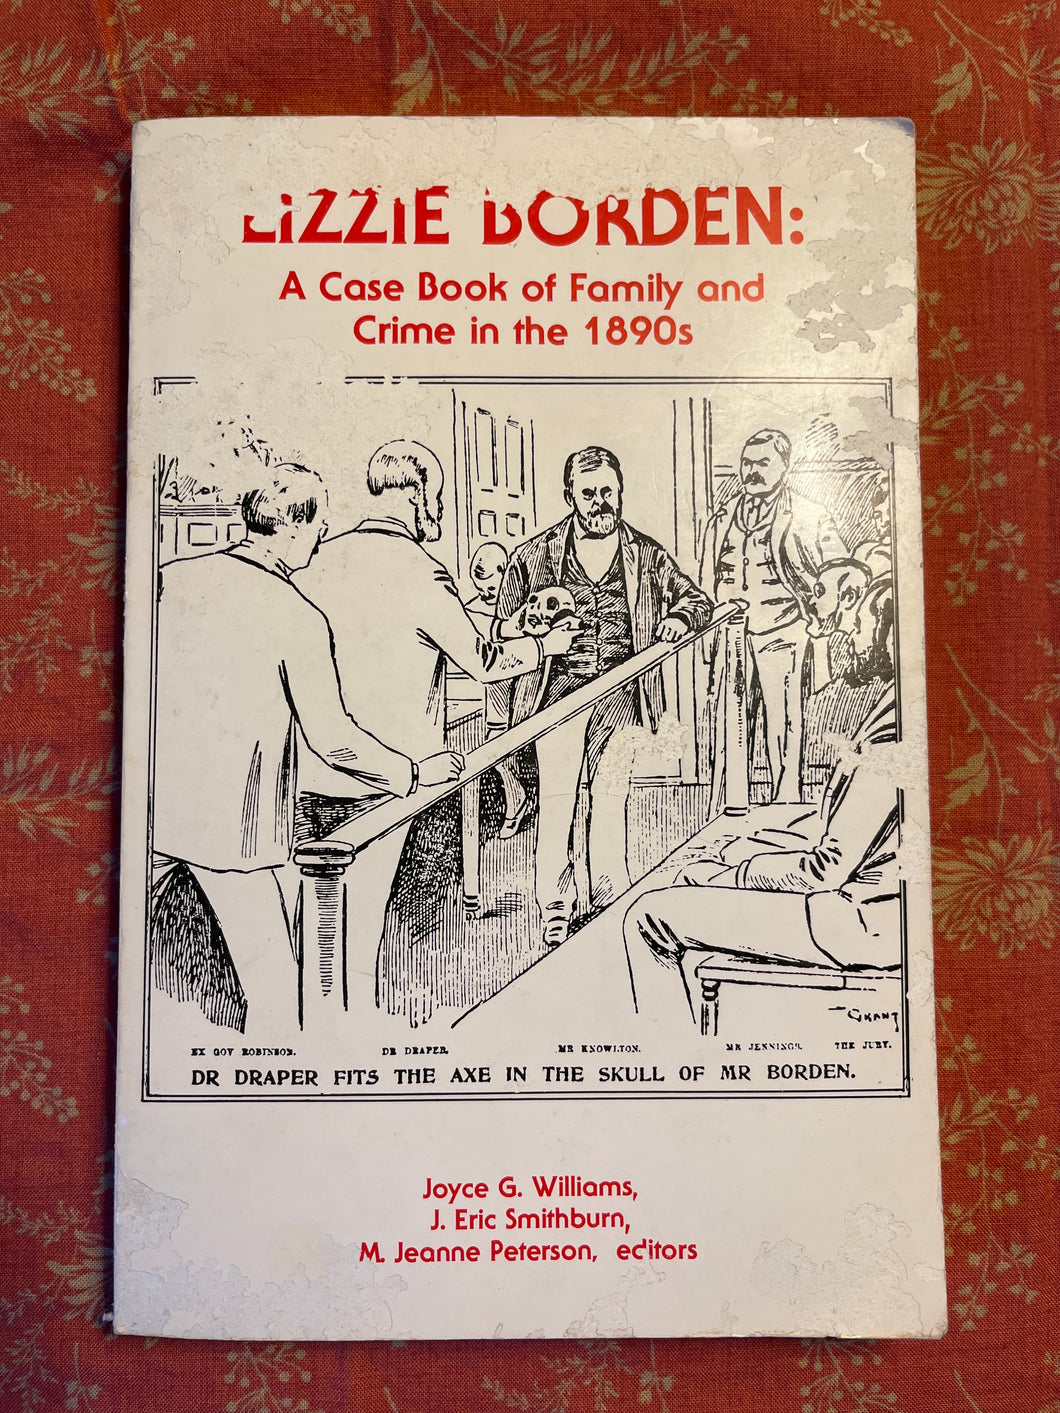 Lizzie Borden: A Case Book of Family and Crime in the 1890s